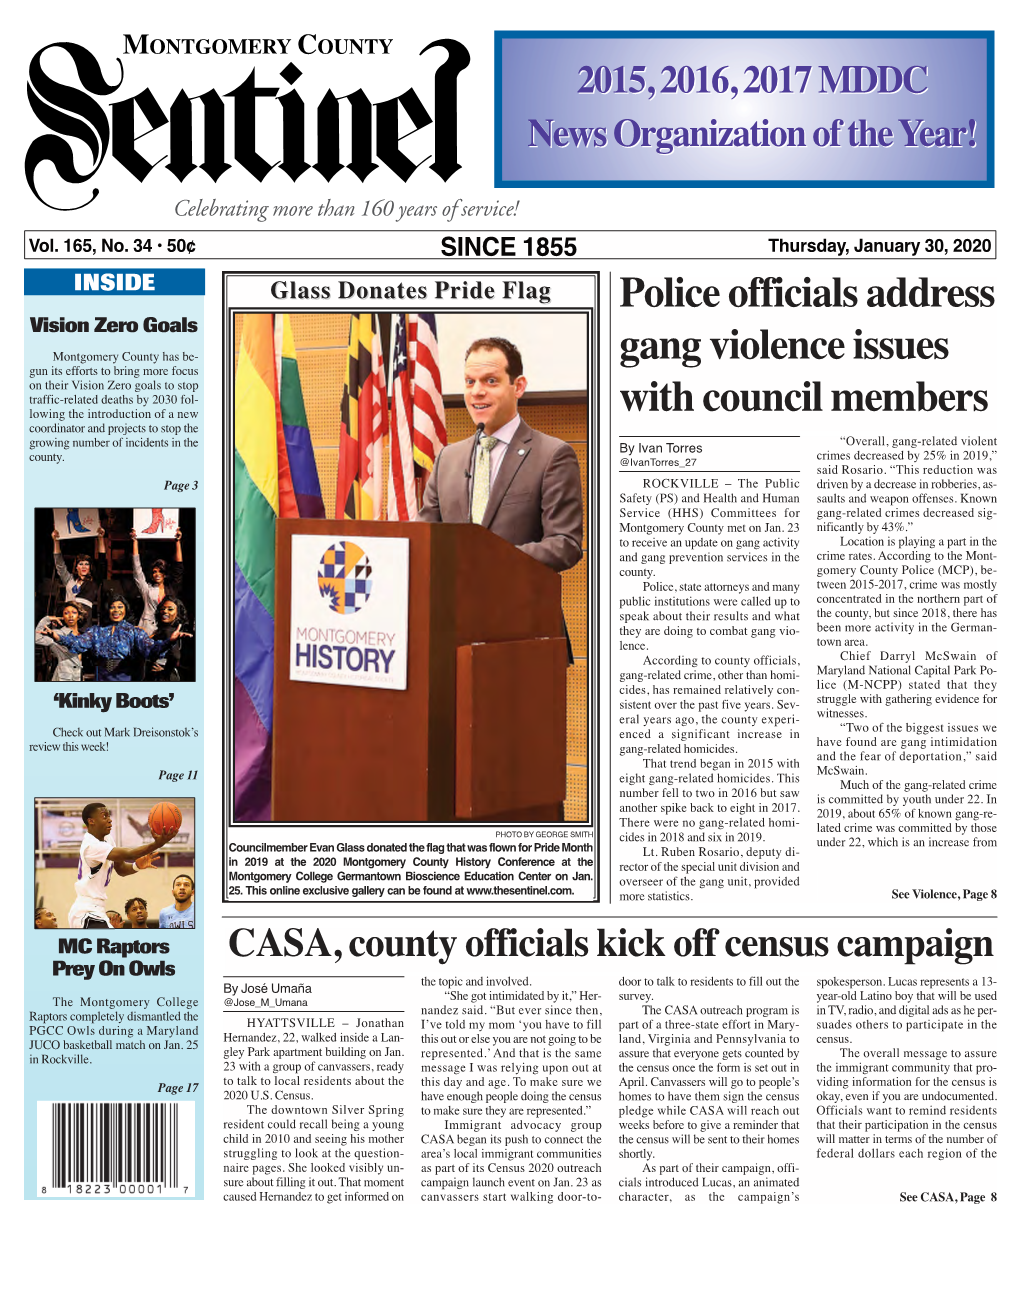 THE MONTGOMERY COUNTY SENTINEL JANUARY 30, 2020 EFLECTIONS R the Montgomery County Sentinel, Published Weekly by Berlyn Inc